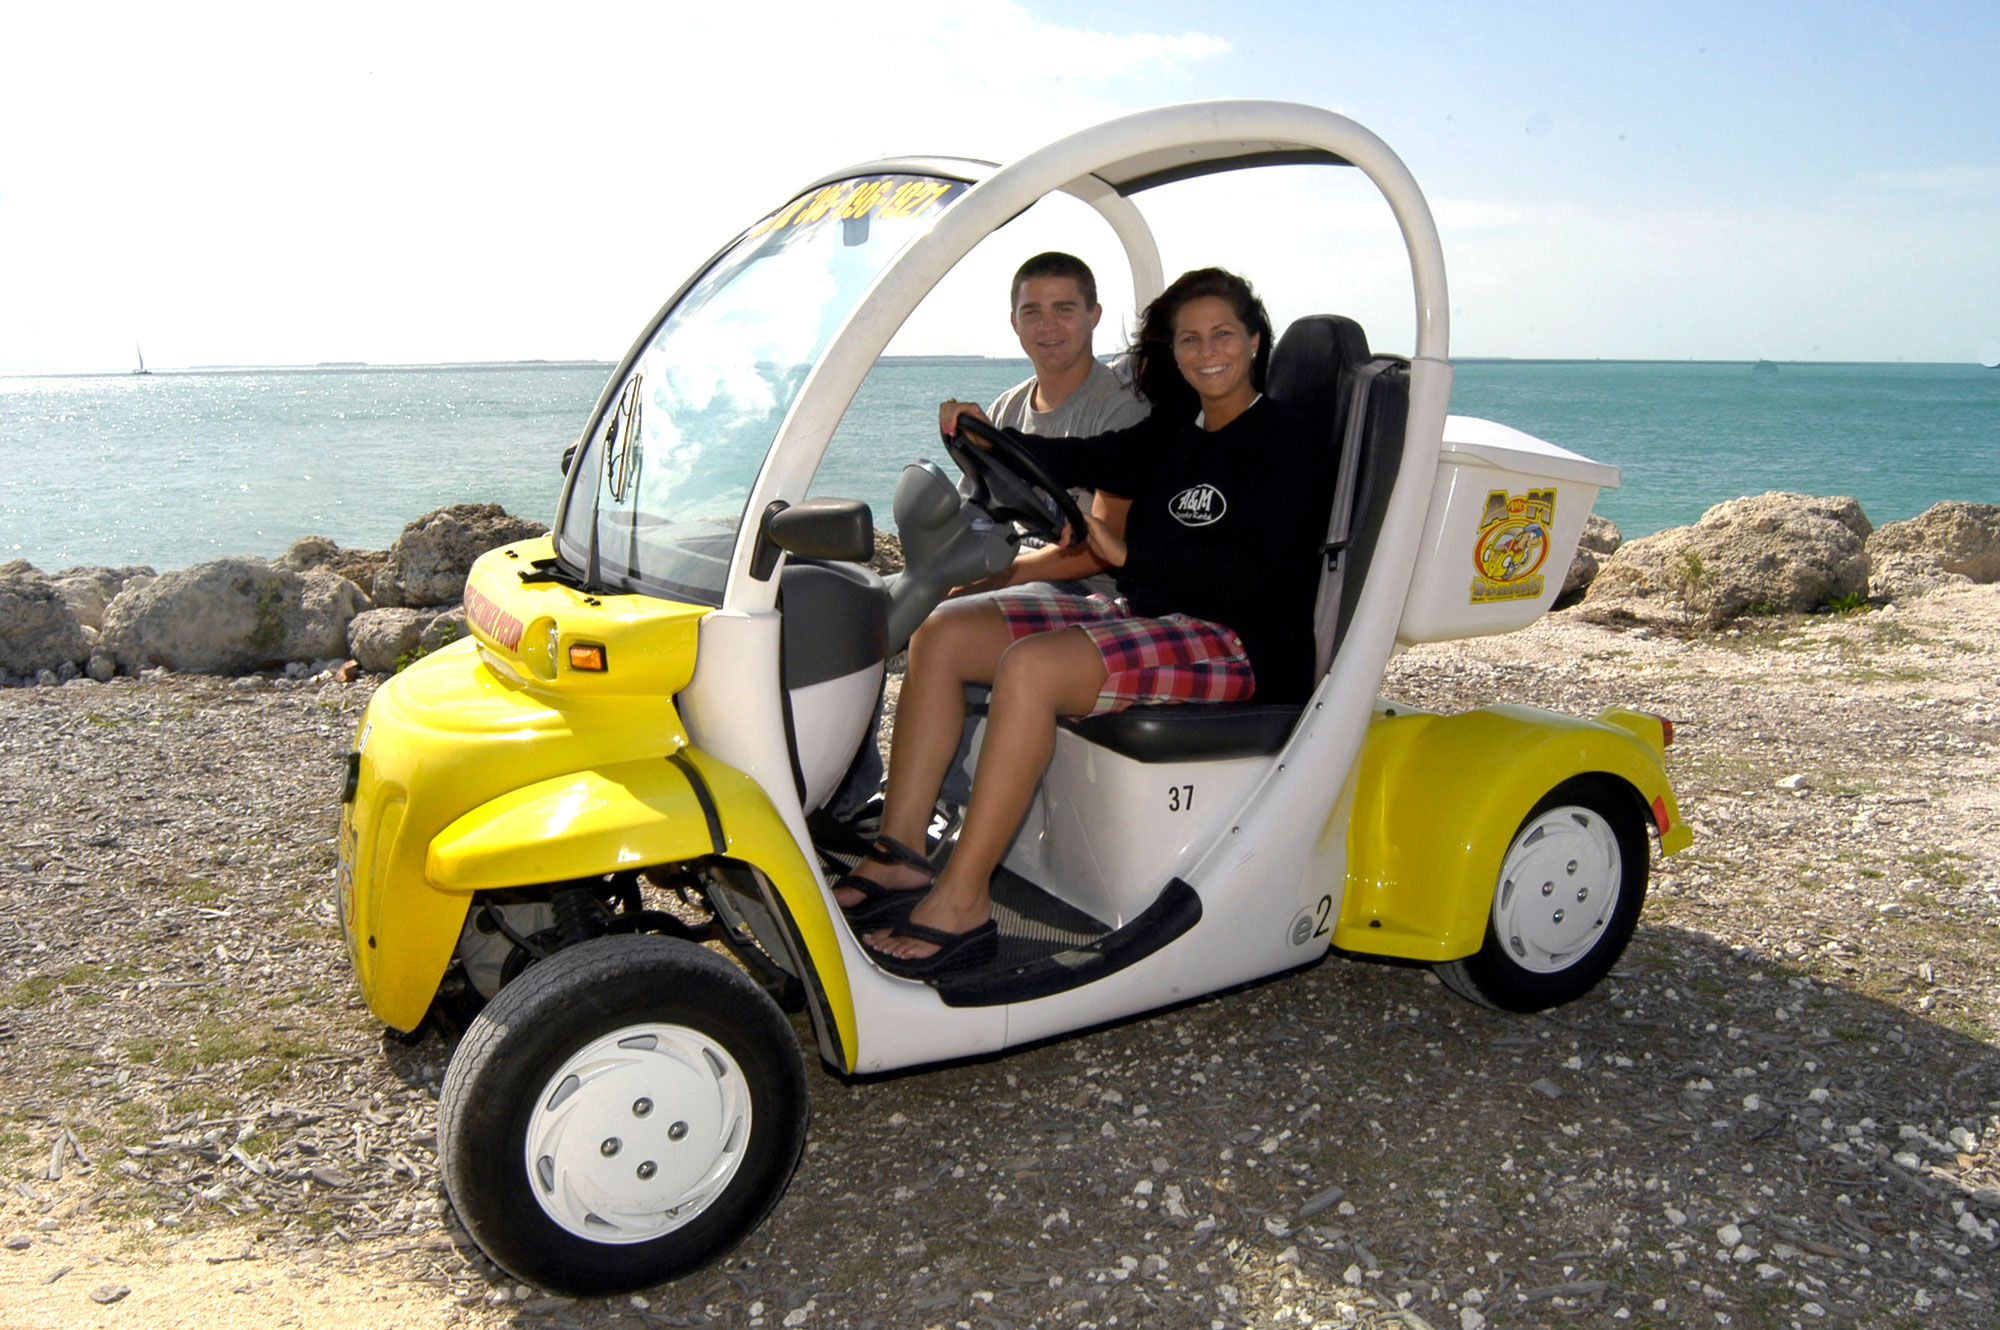 White and yellow two seater rental electric car with a woman and a young men aboard. They are parked in Key West by the Ocean